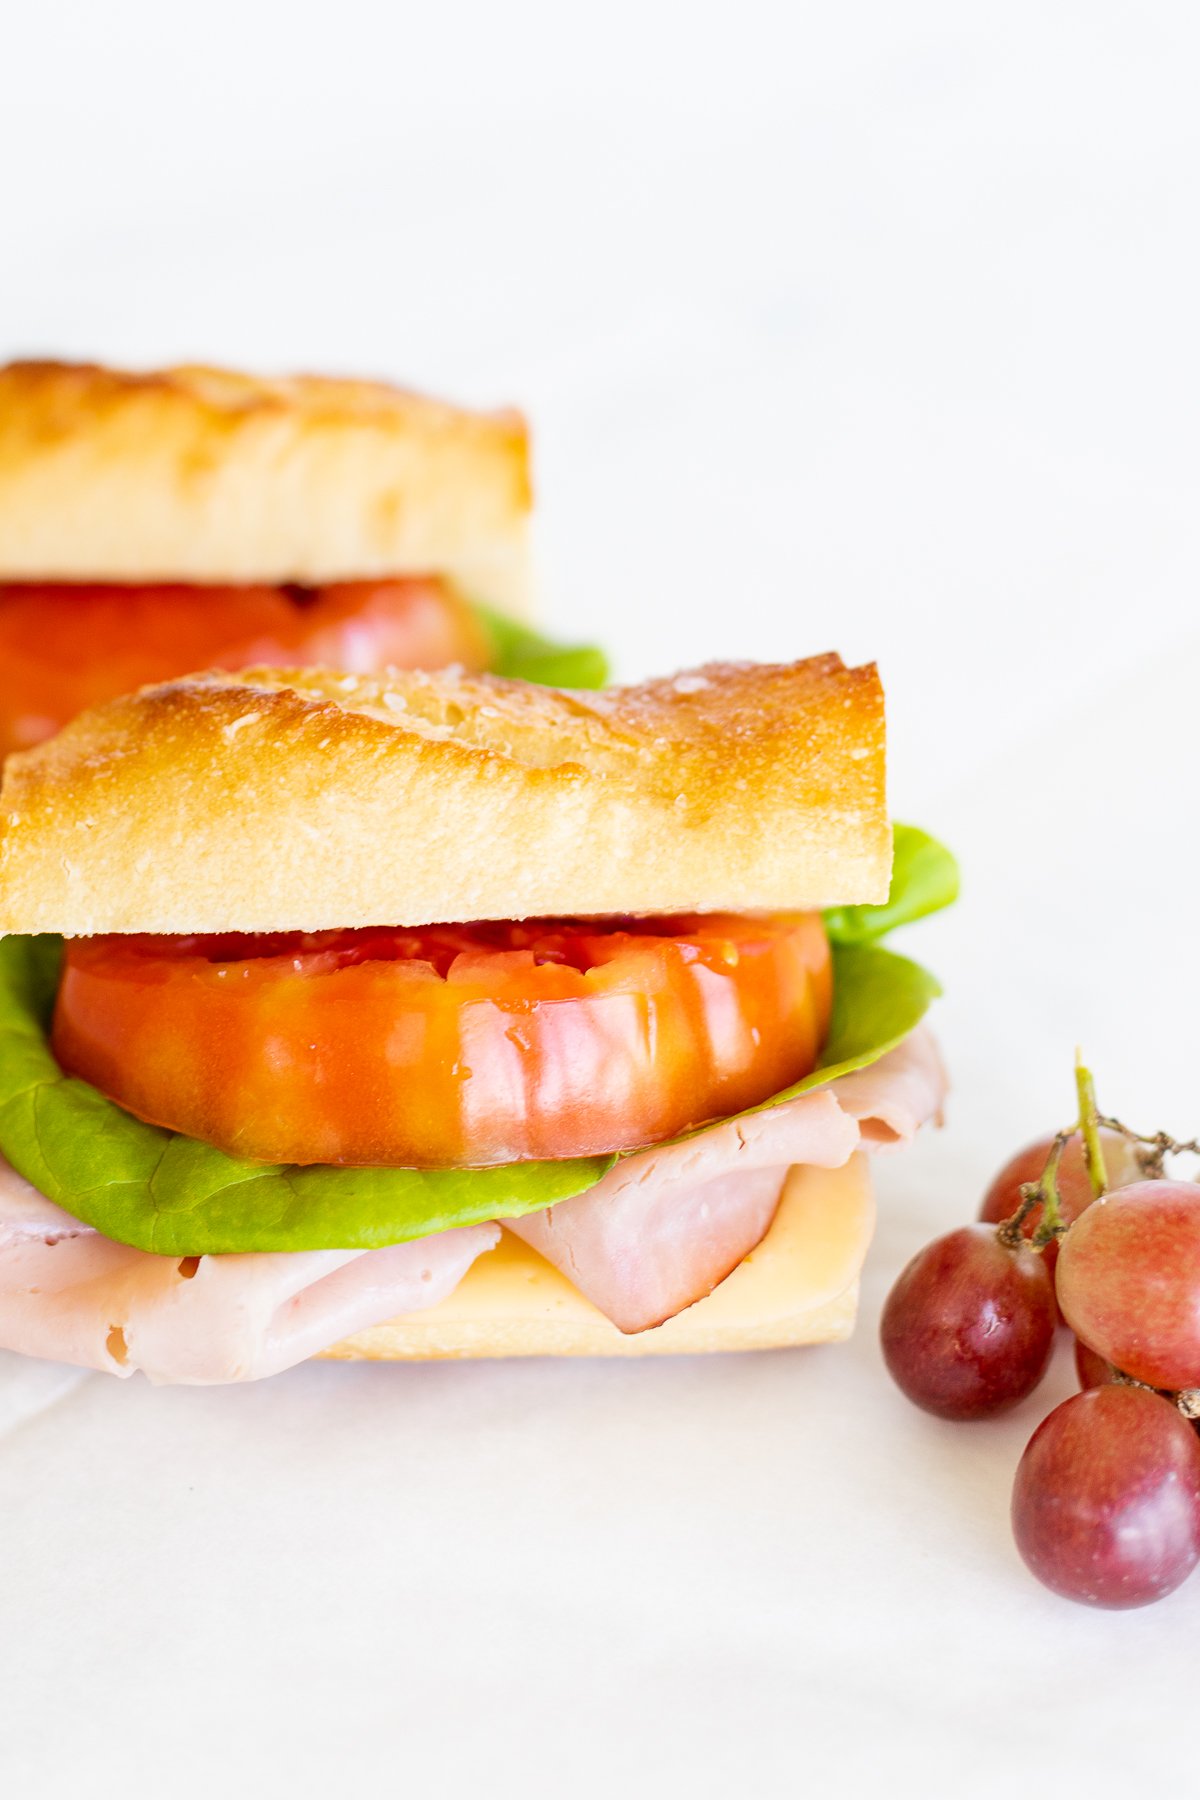 A picnic sandwich with ham, tomatoes, lettuce and grapes.